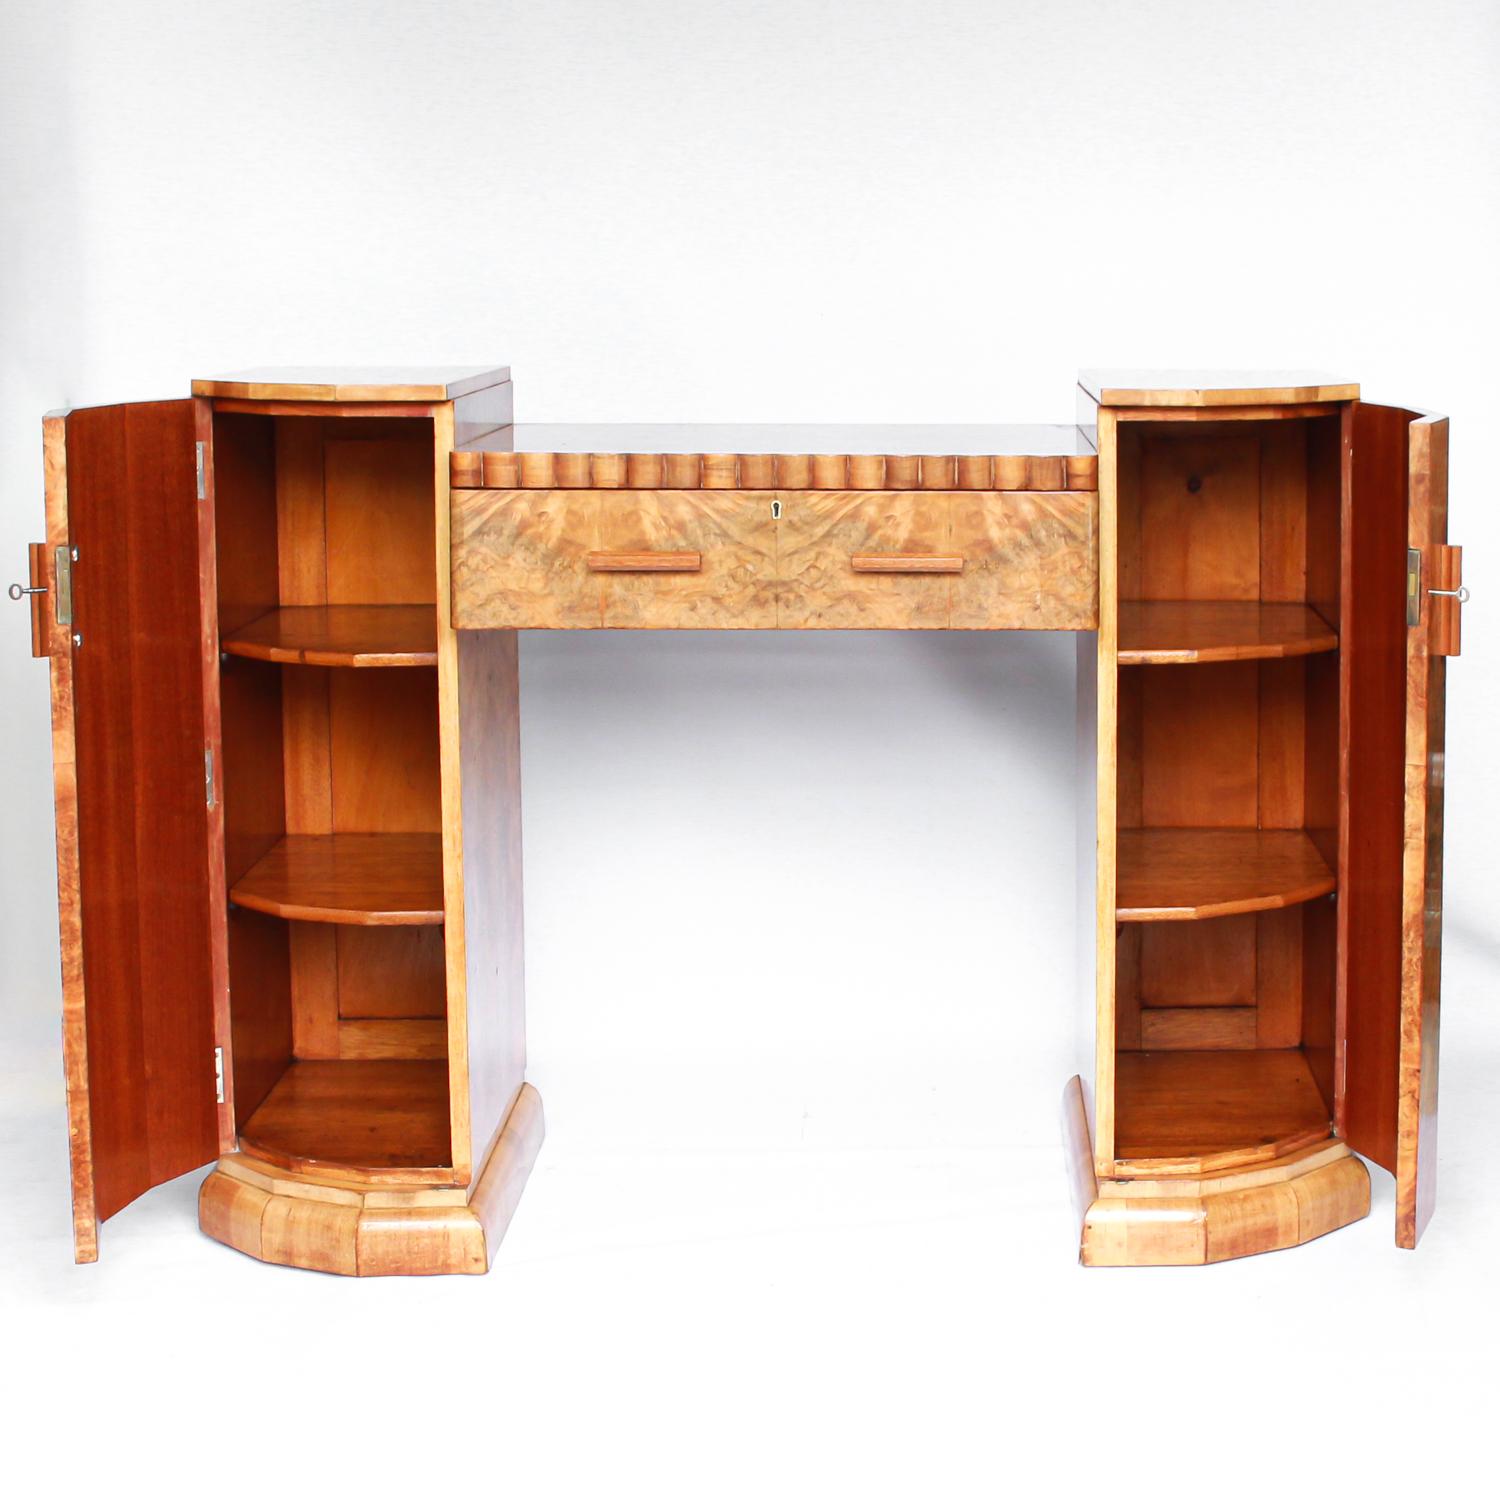 An Art Deco console sideboard by Hille. Burr walnut veneer throughout. Scallop-edged detail to front with integral drawer. Shelved cabinets to either side.

Dimensions: H 97cm, W 129cm, D 46cm

Origin: English

circa 1930



   